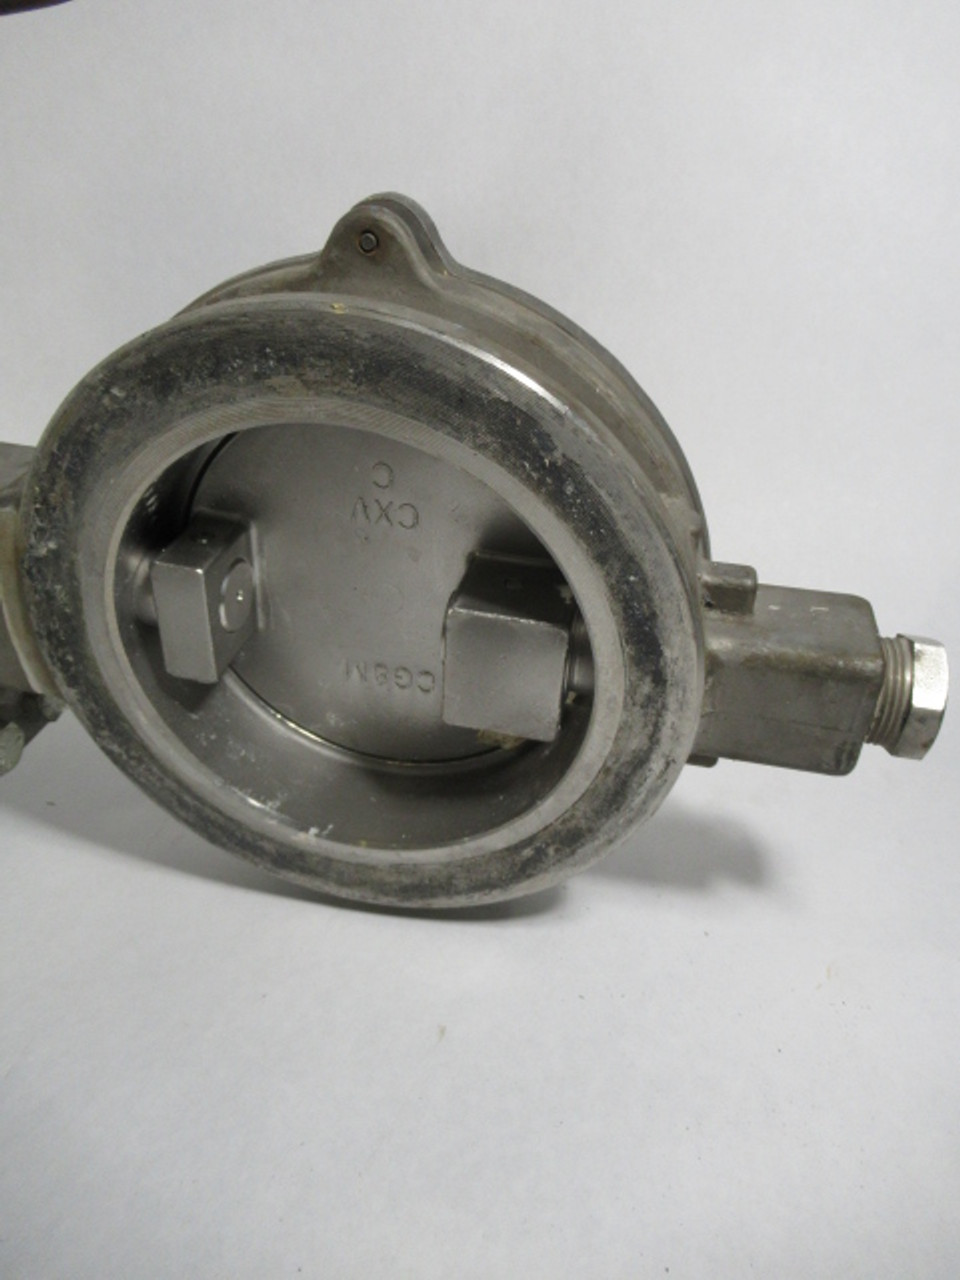 Fisher CN627366 Valve Actuator C/W Butterfly Valve Size 6" USED